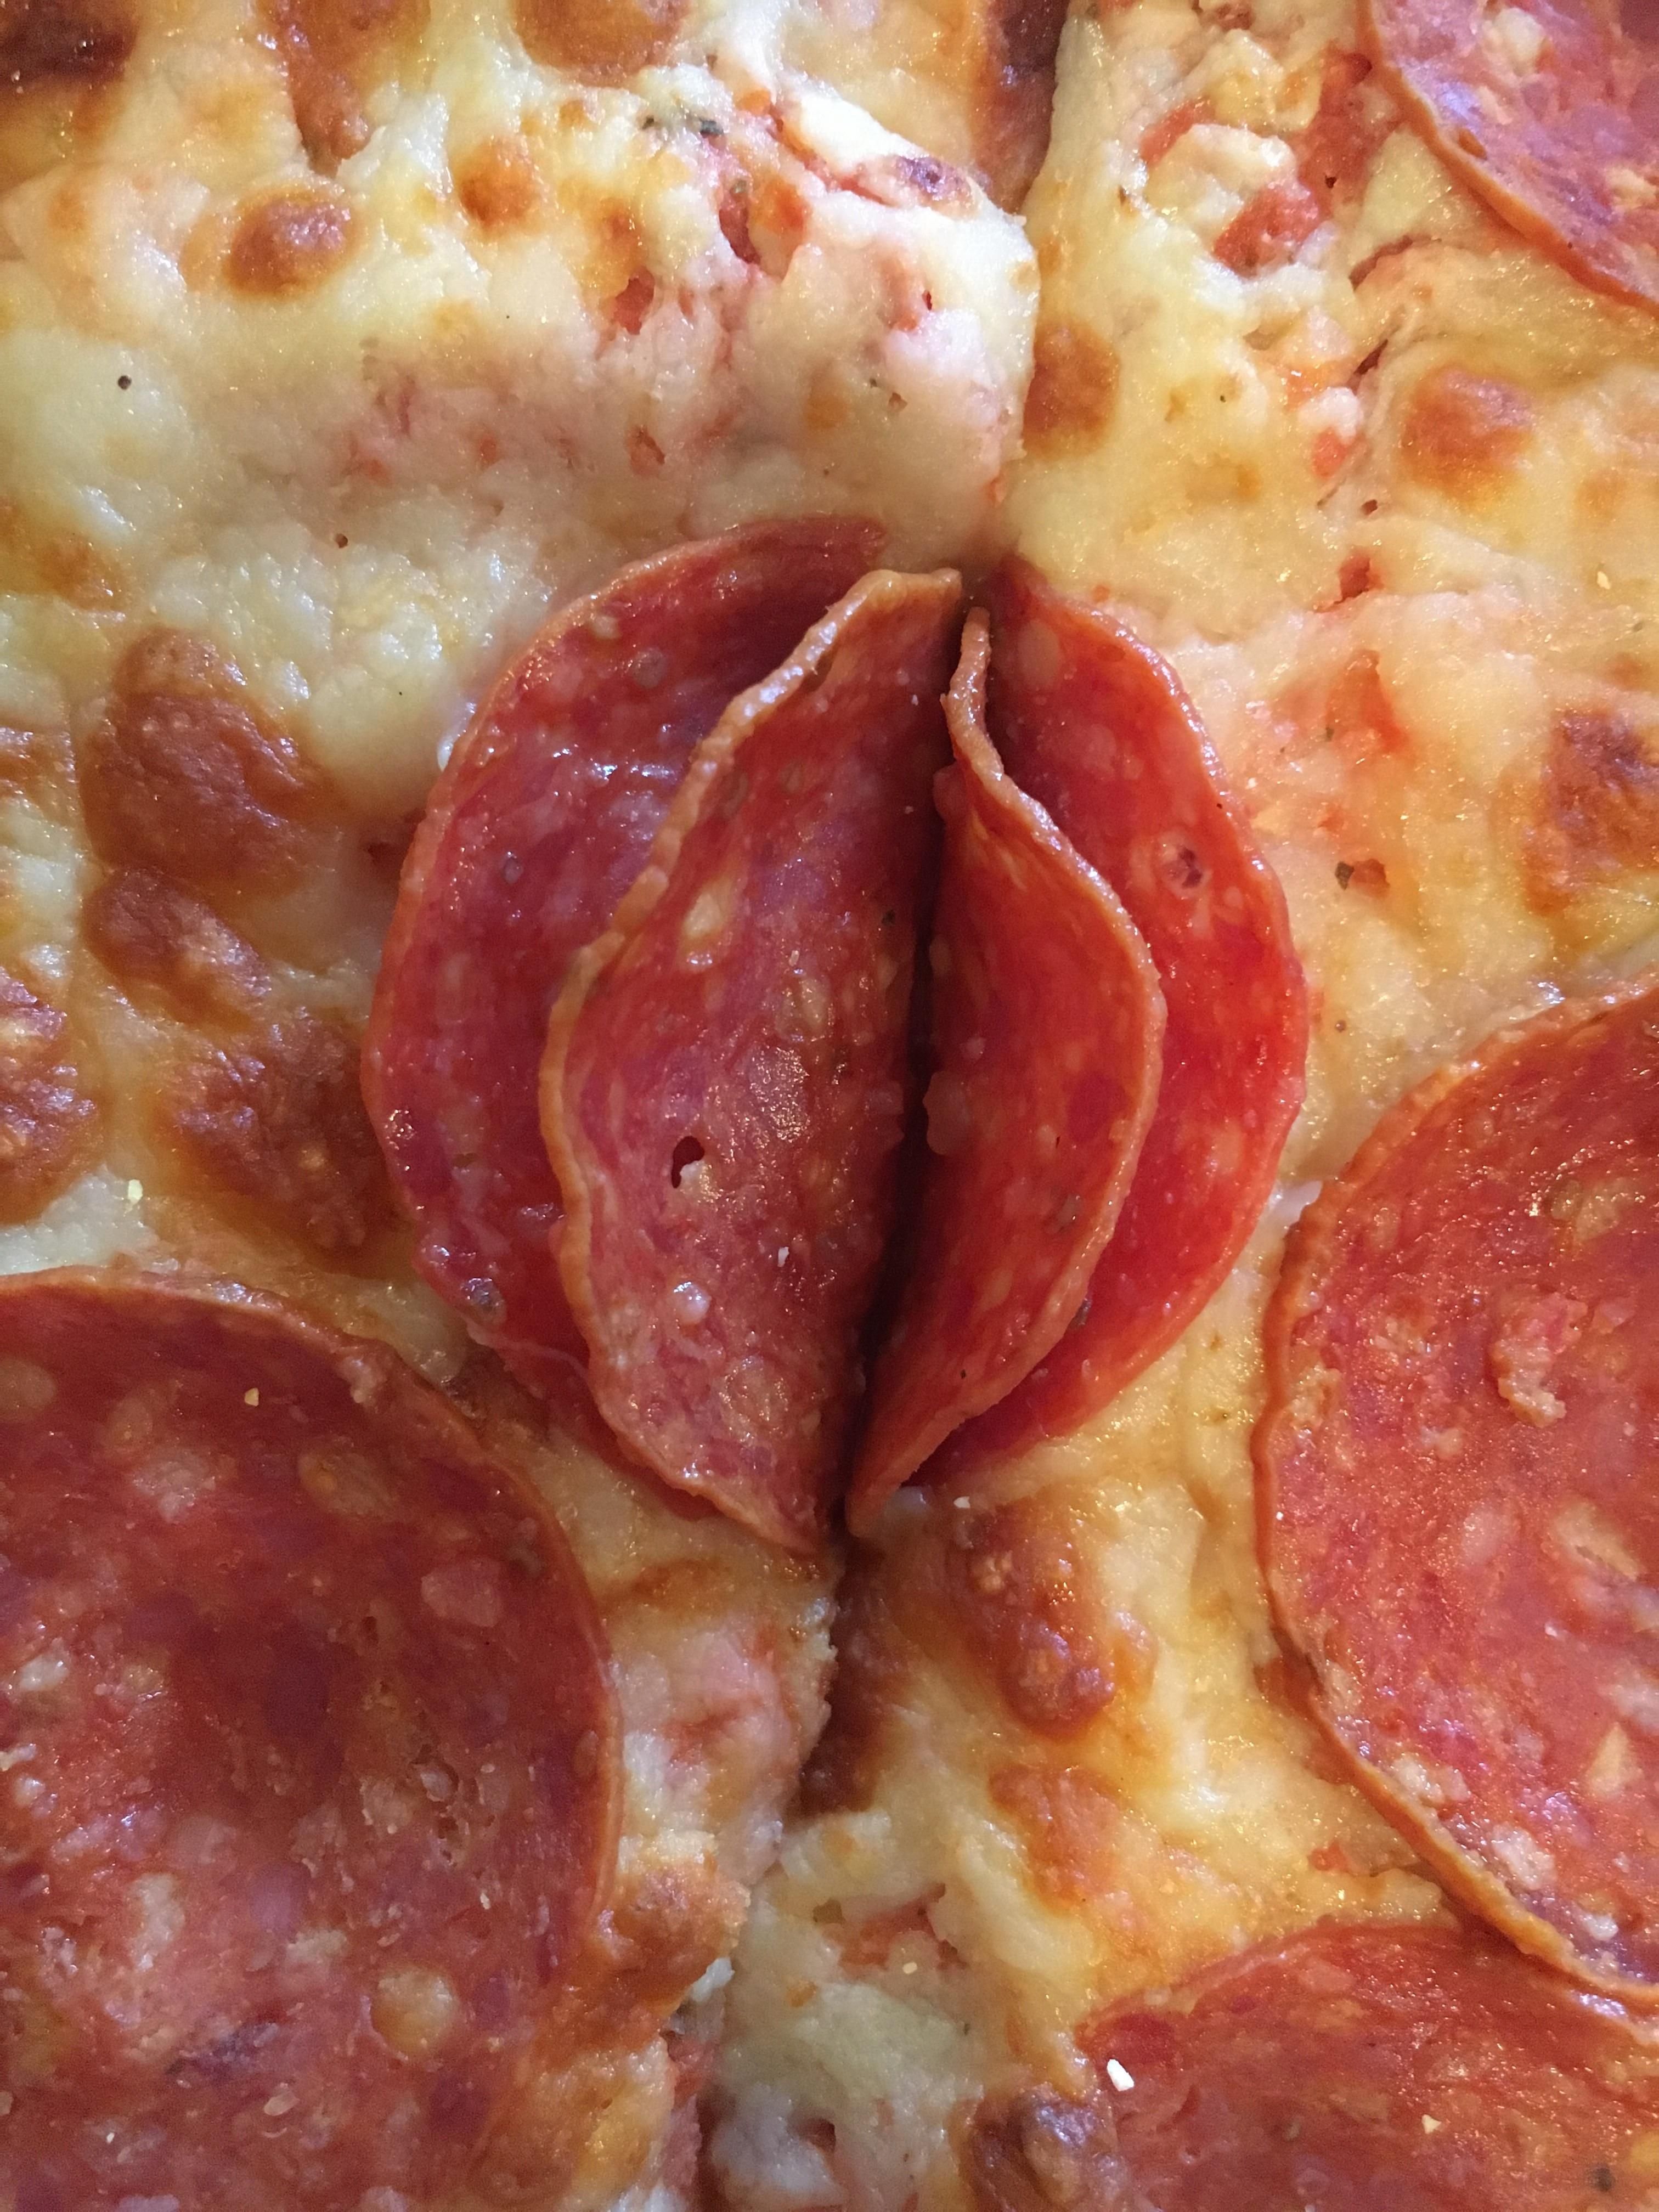 Never really understood the meaning of “Food Porn” until I opened my pizza.